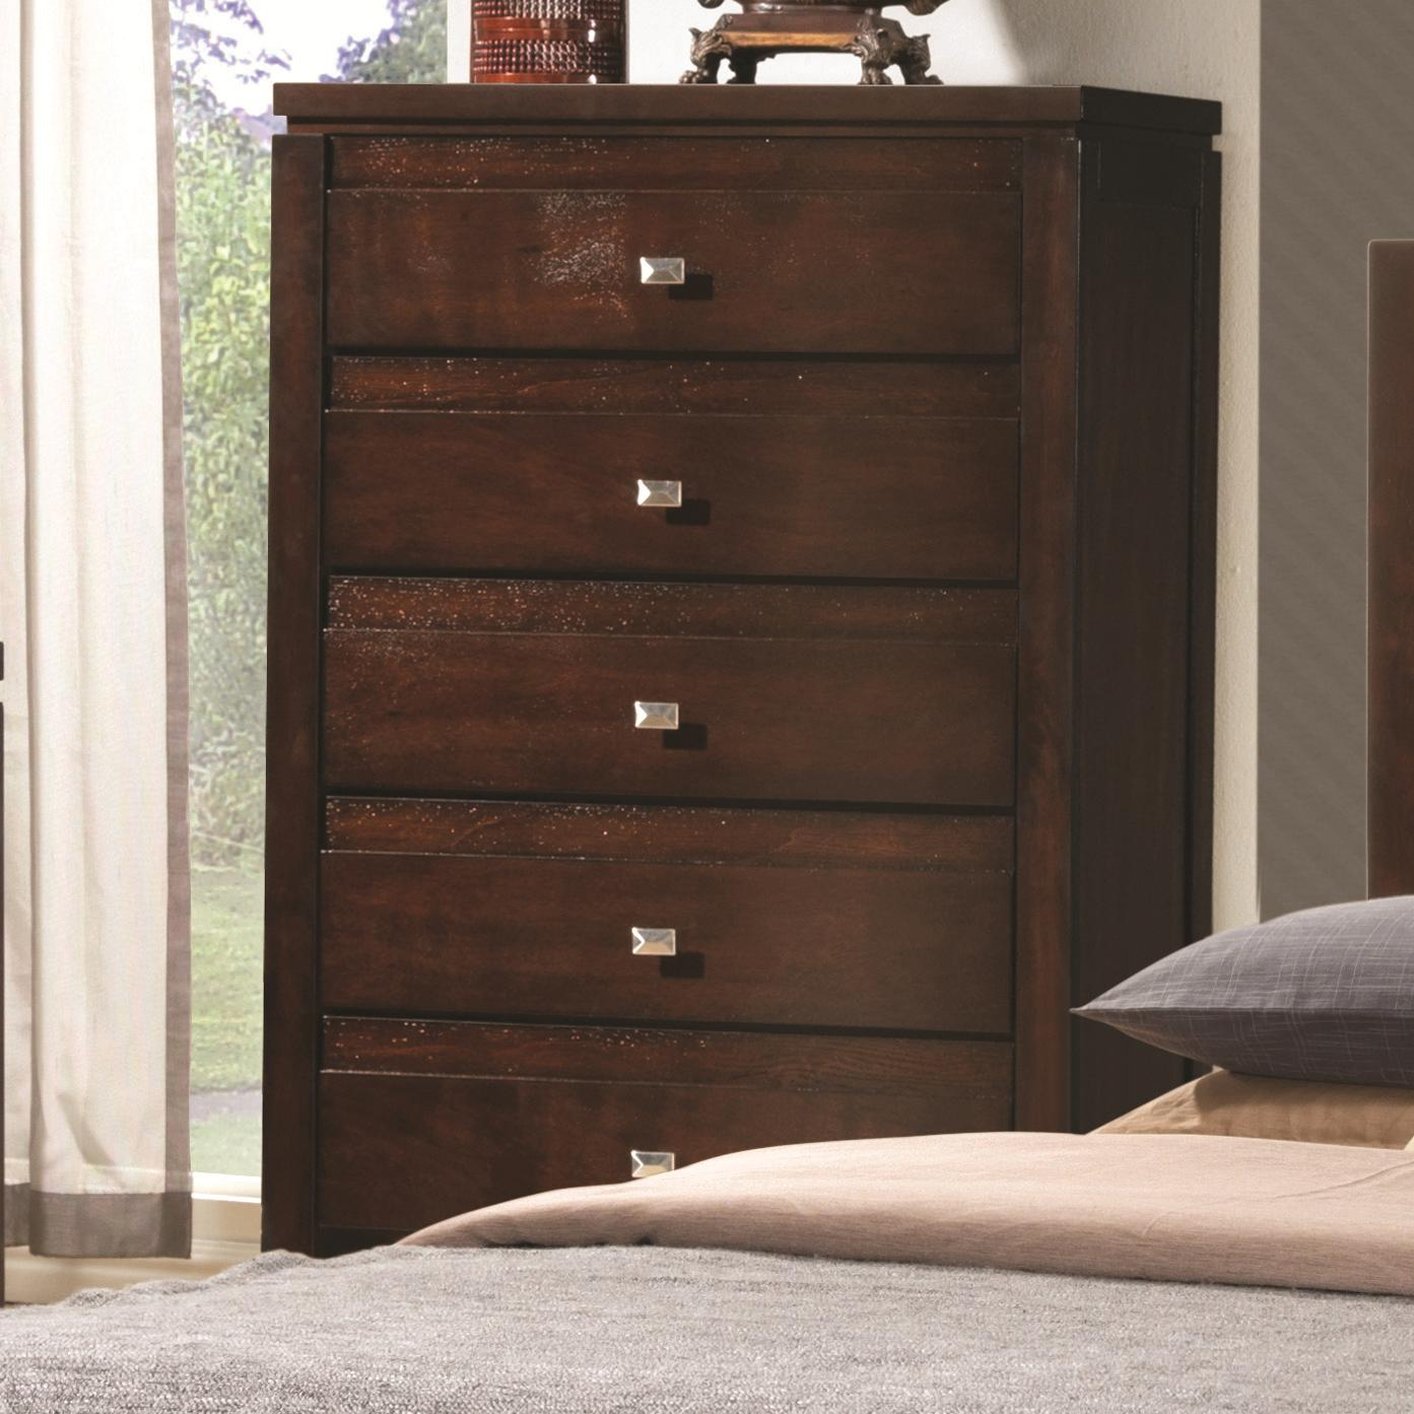 brown wood chest of drawers GSIRCIS